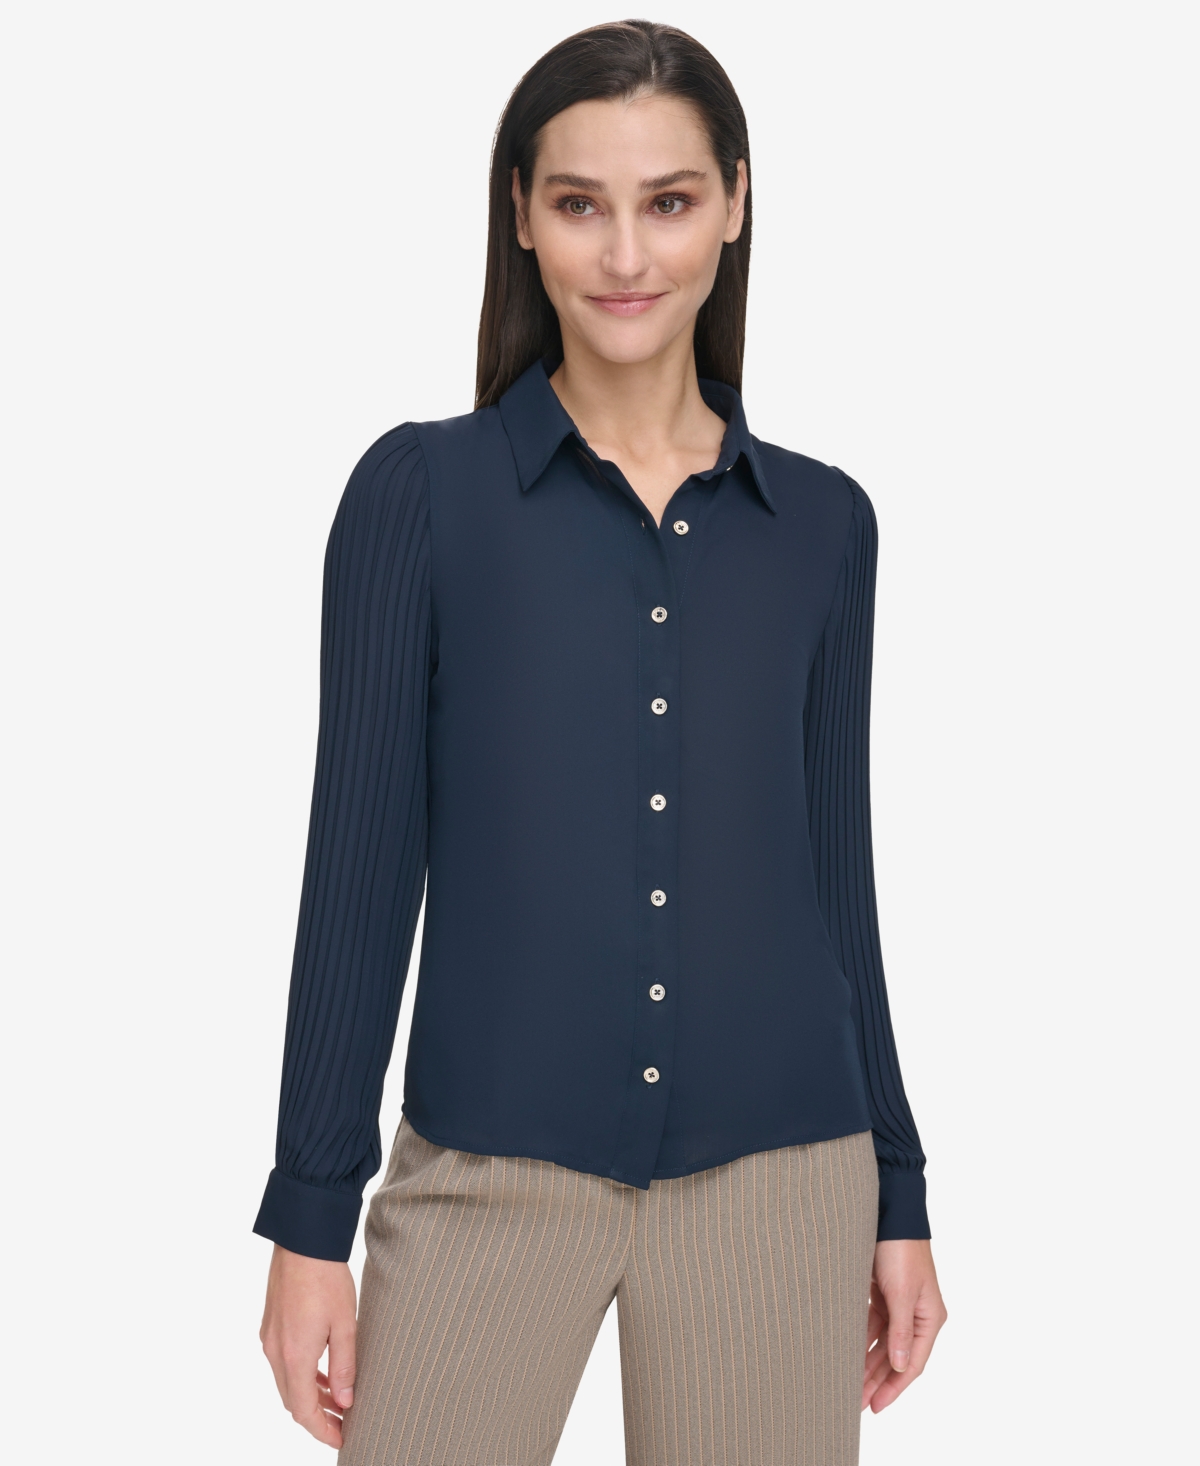 TOMMY HILFIGER WOMEN'S PLEATED-SLEEVE BUTTON-FRONT TOP